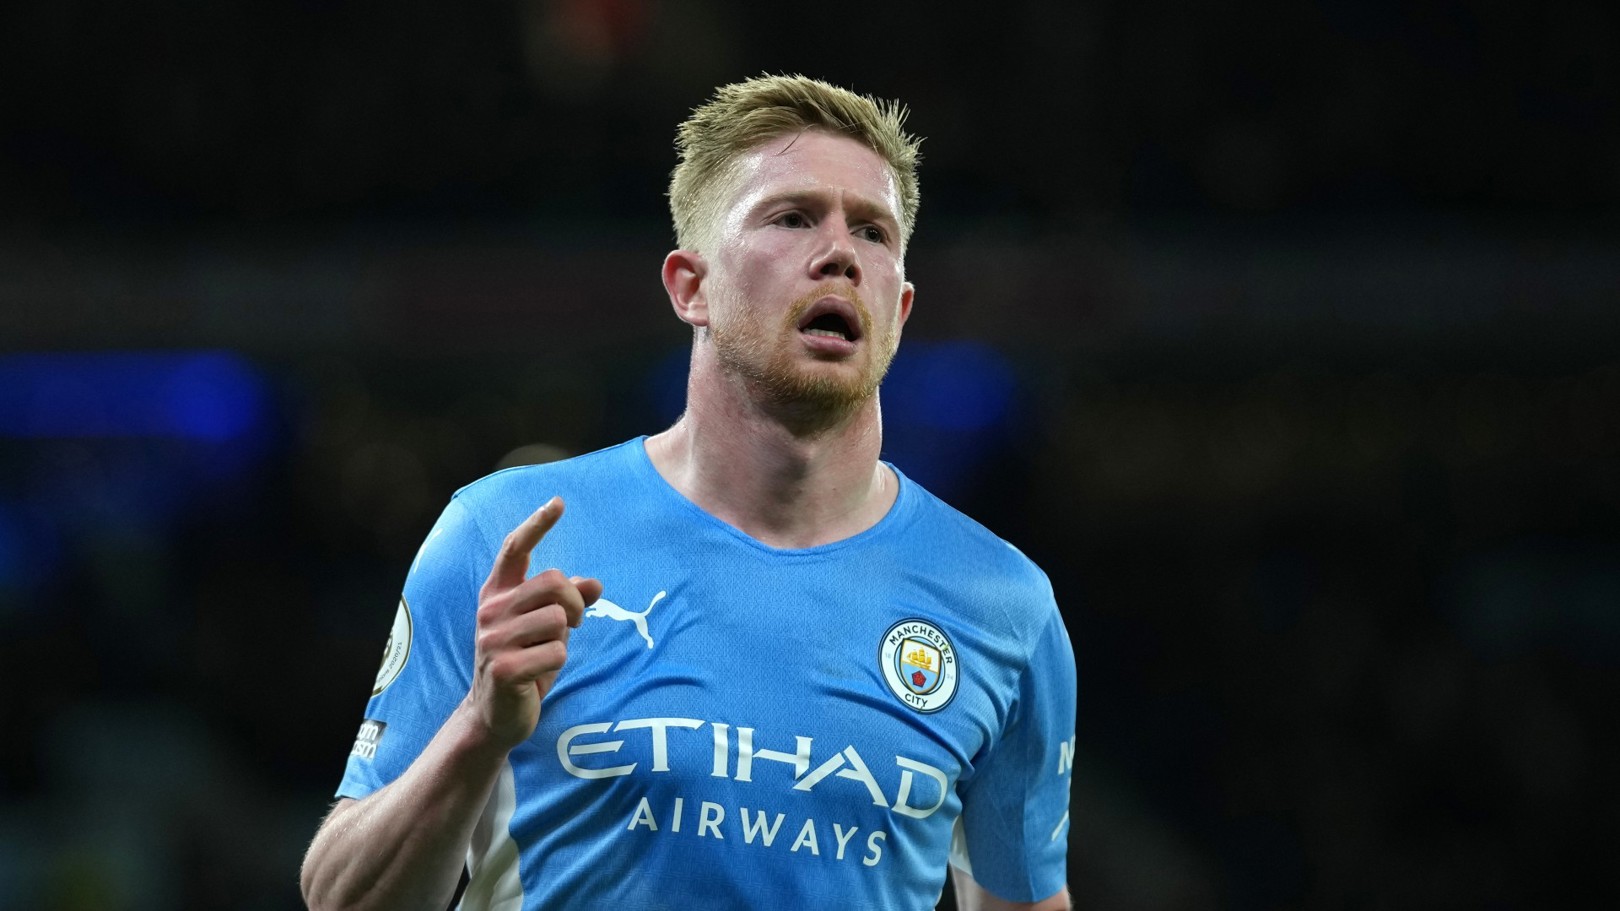 De Bruyne: City need to maintain that standard